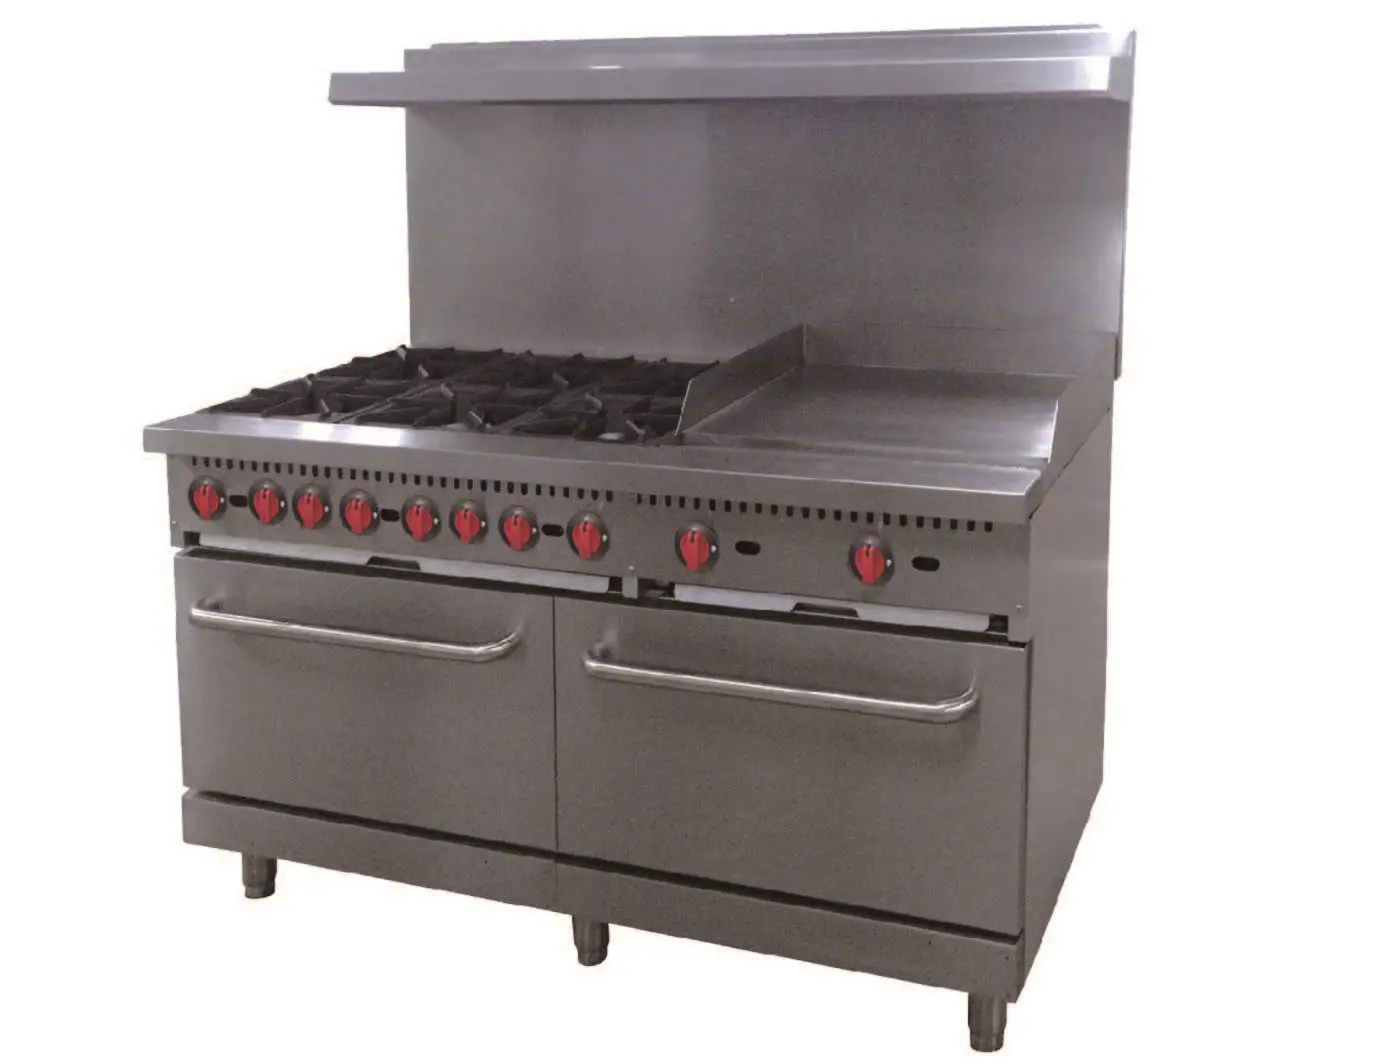 A large commercial kitchen stove with two ovens.